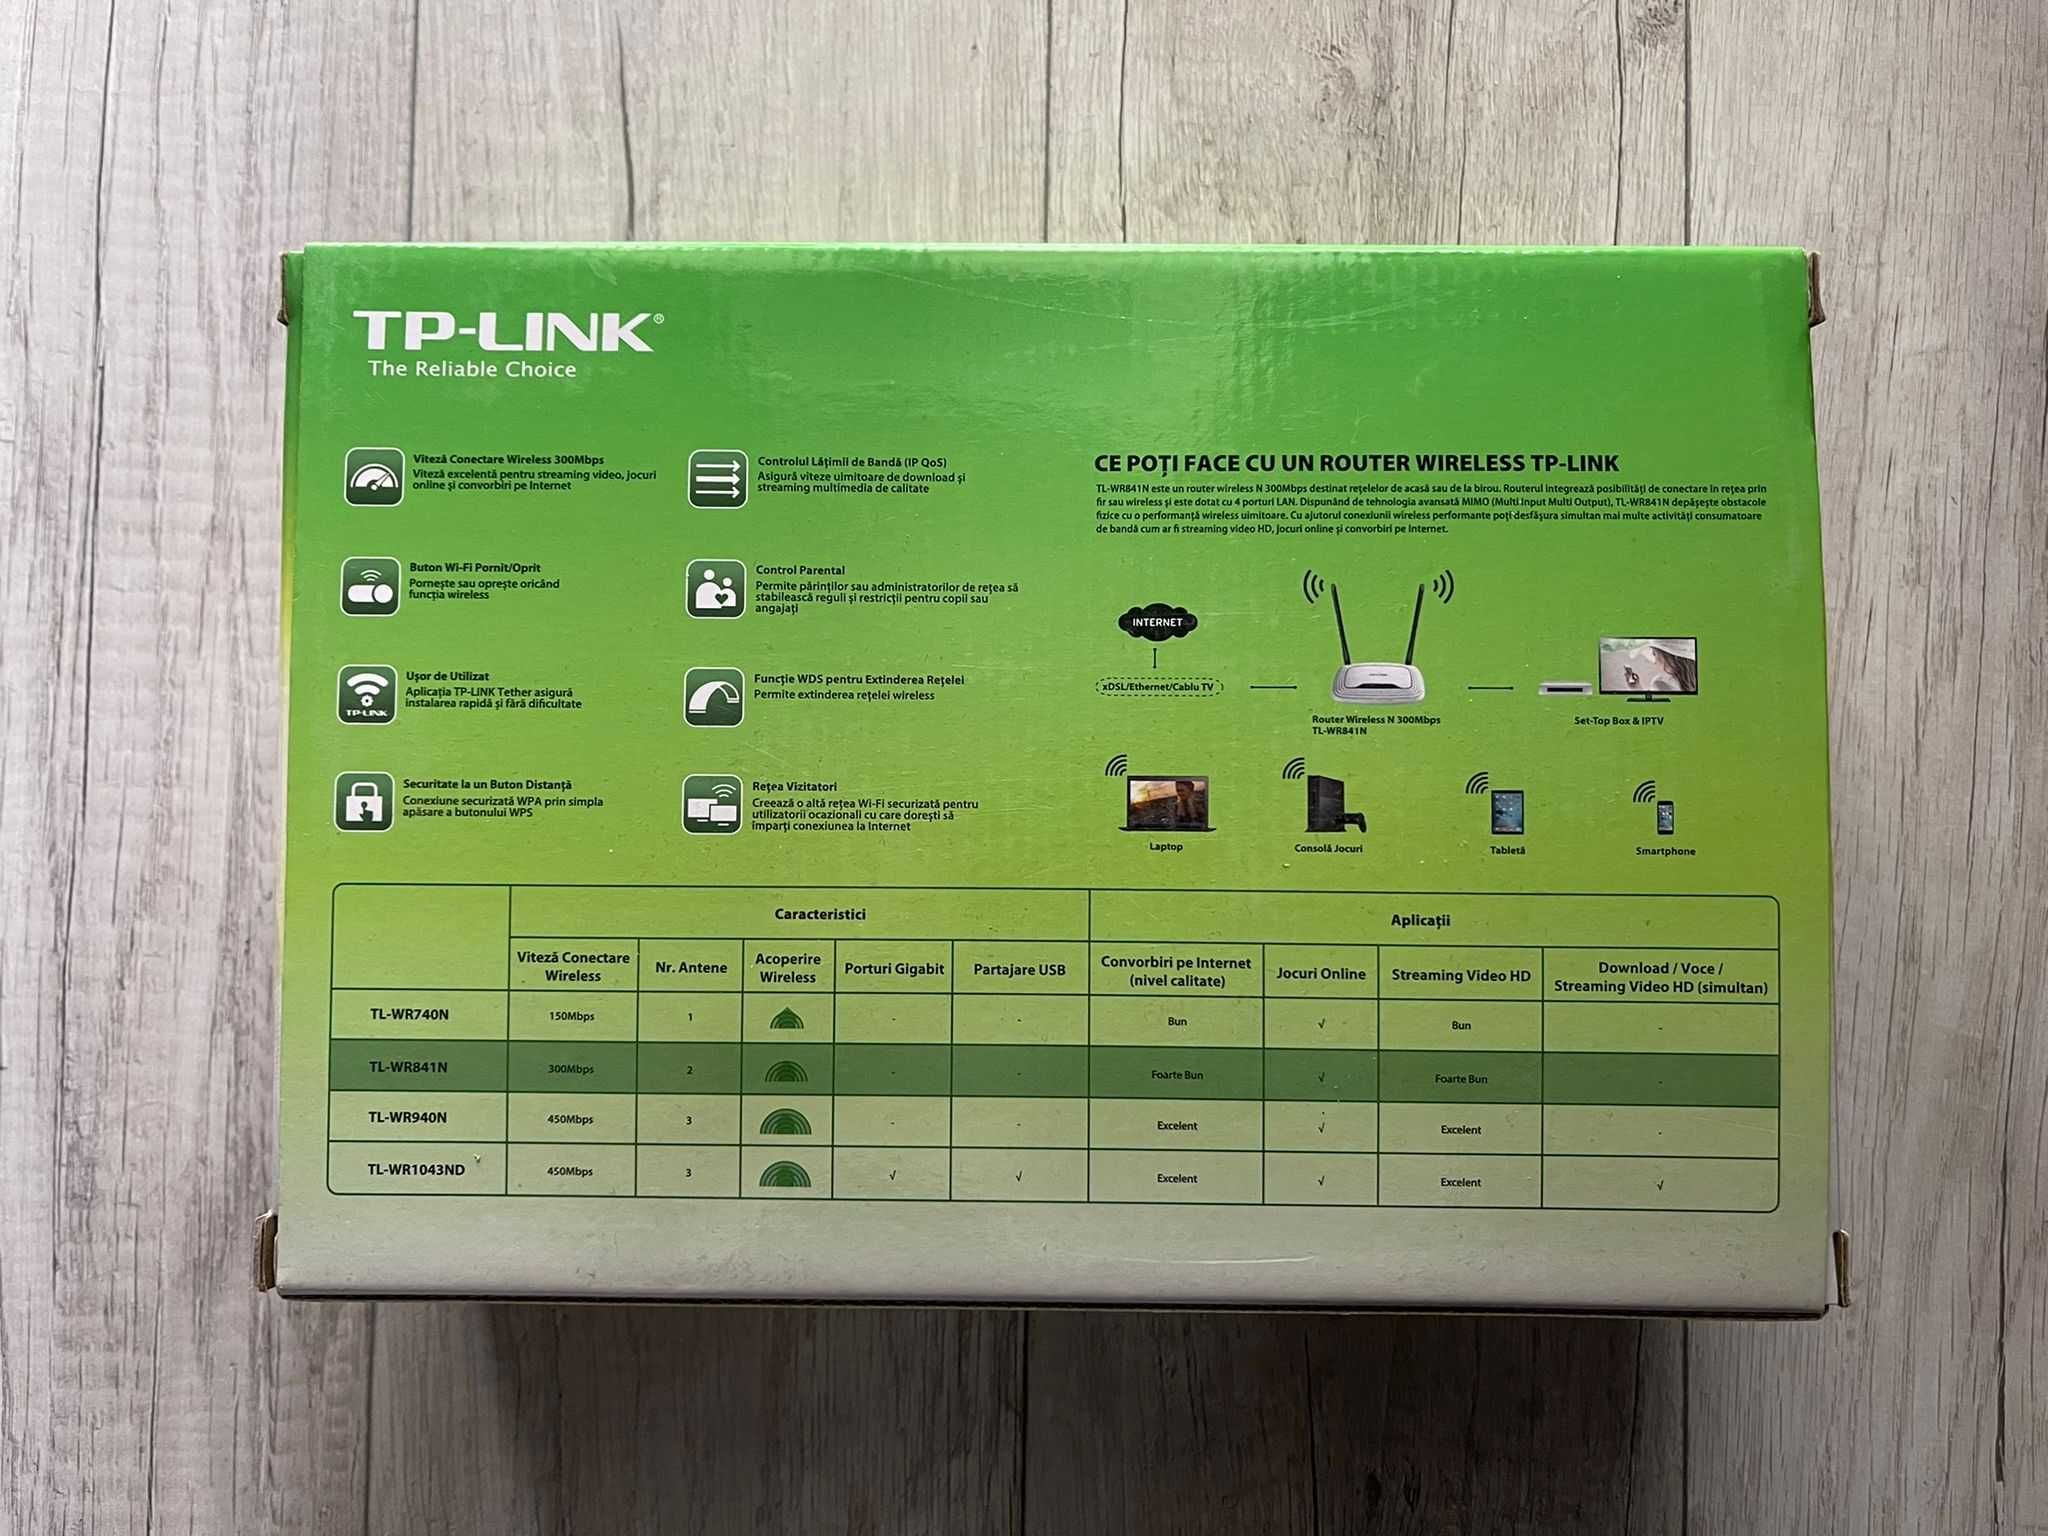 Router Wireless TP-LINK TL-WR841N